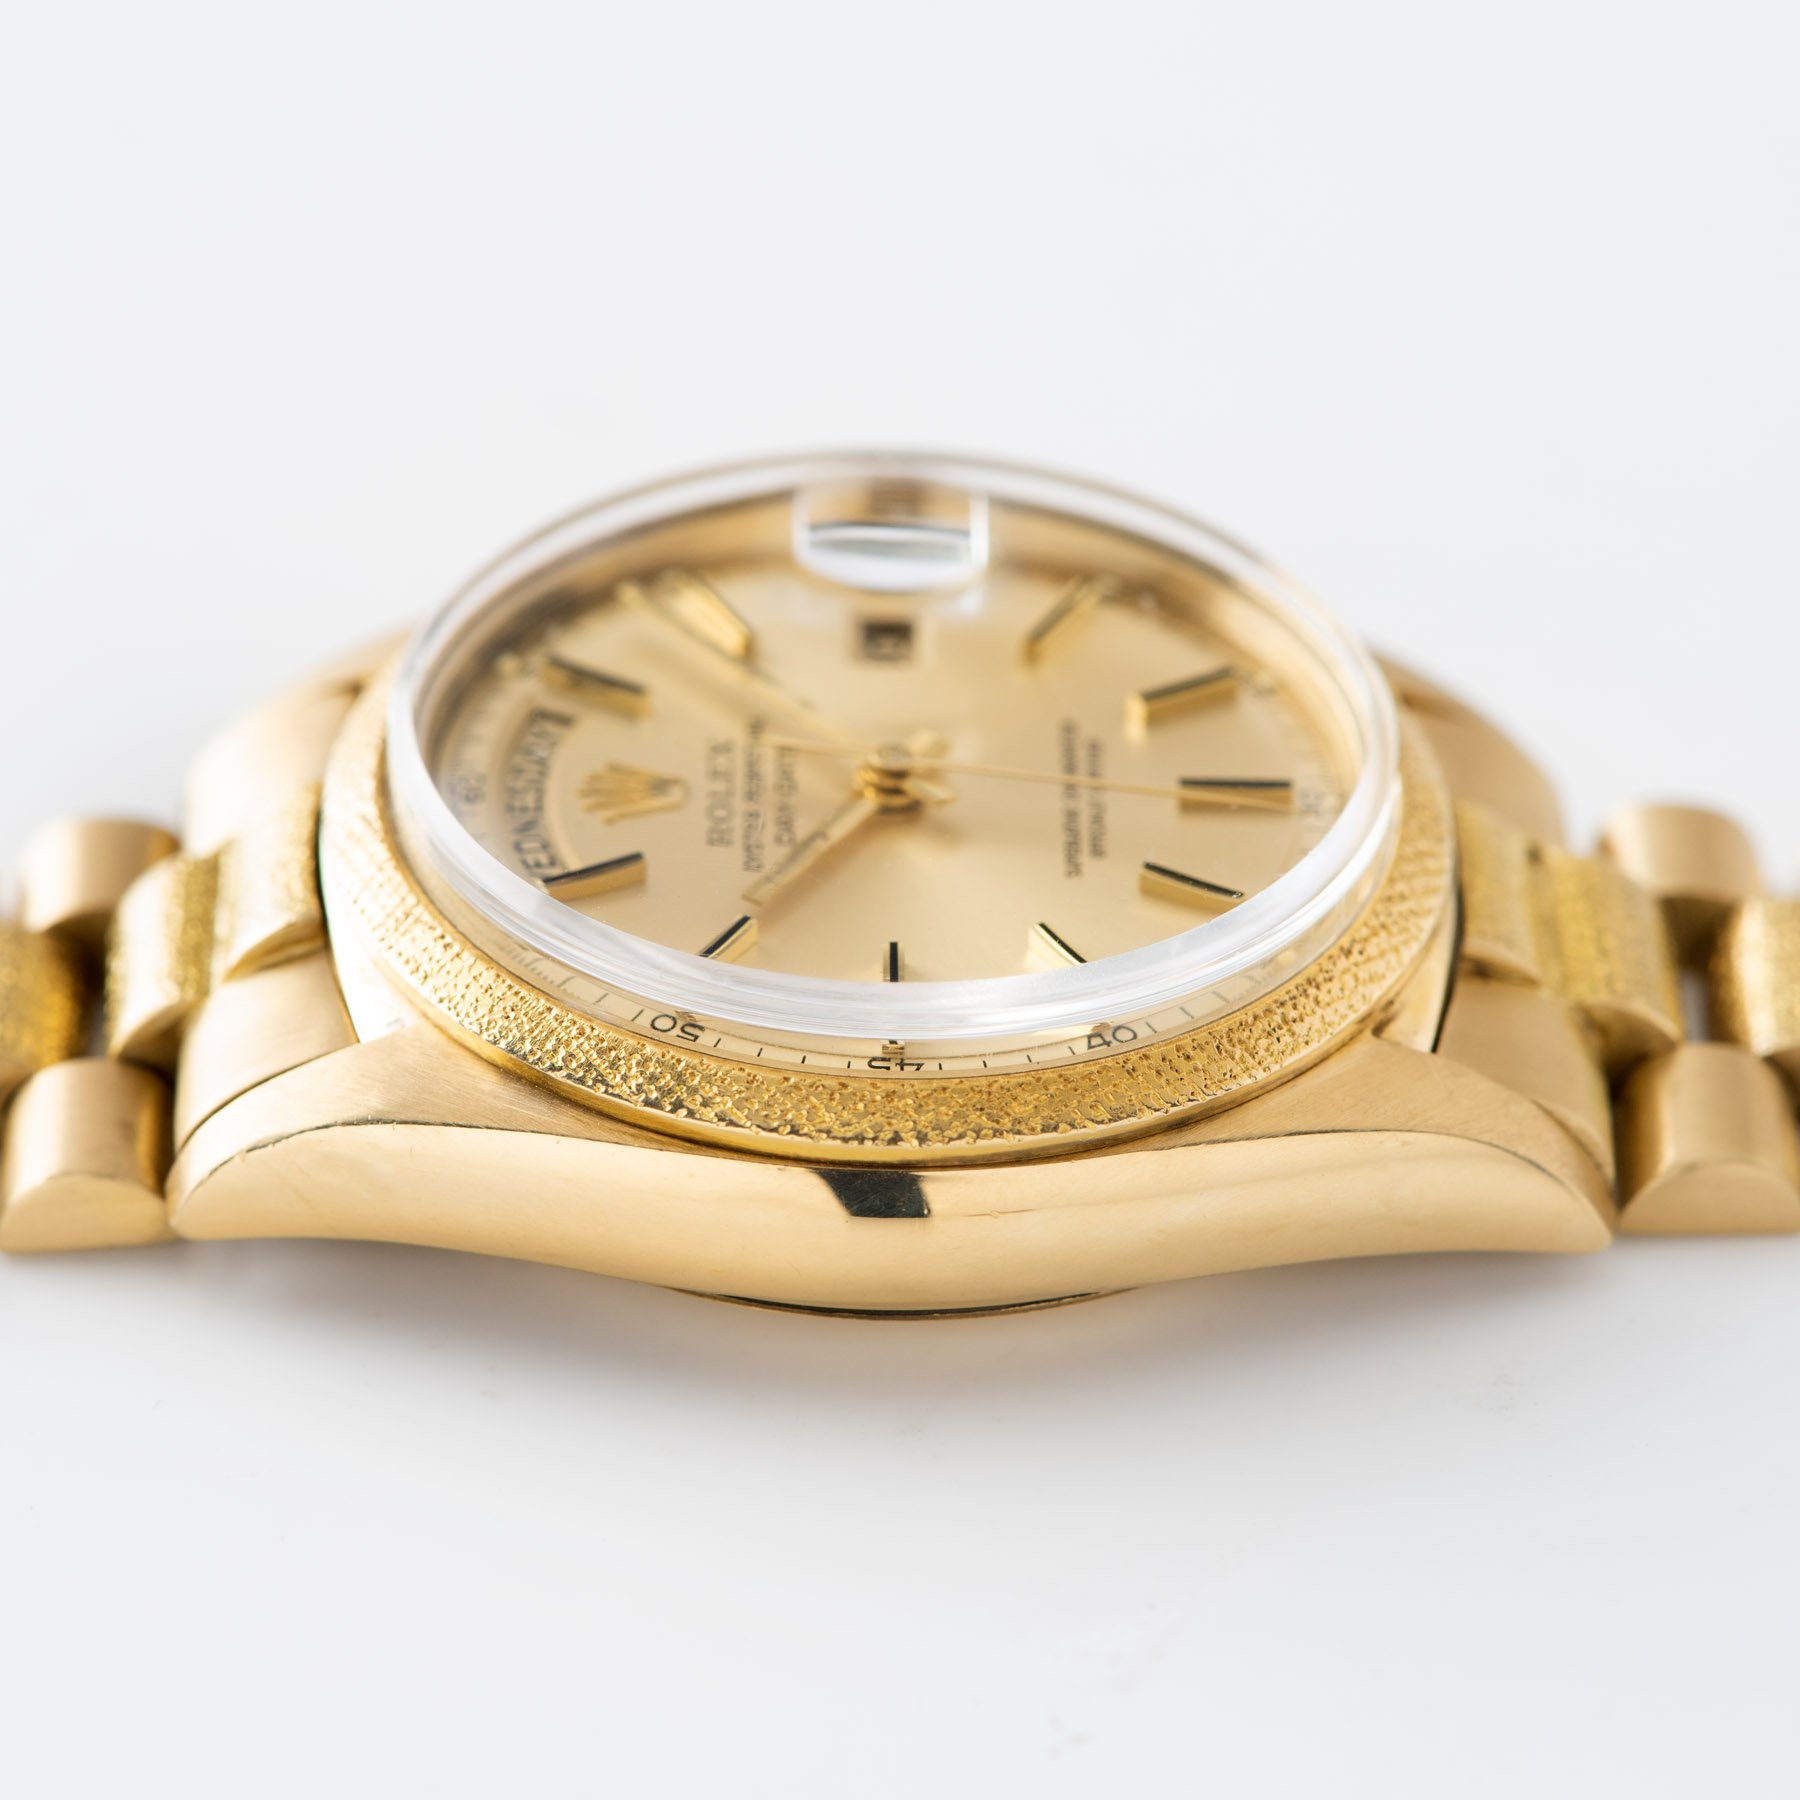 Rolex Day Date Yellow Gold Morellis Finish 1811